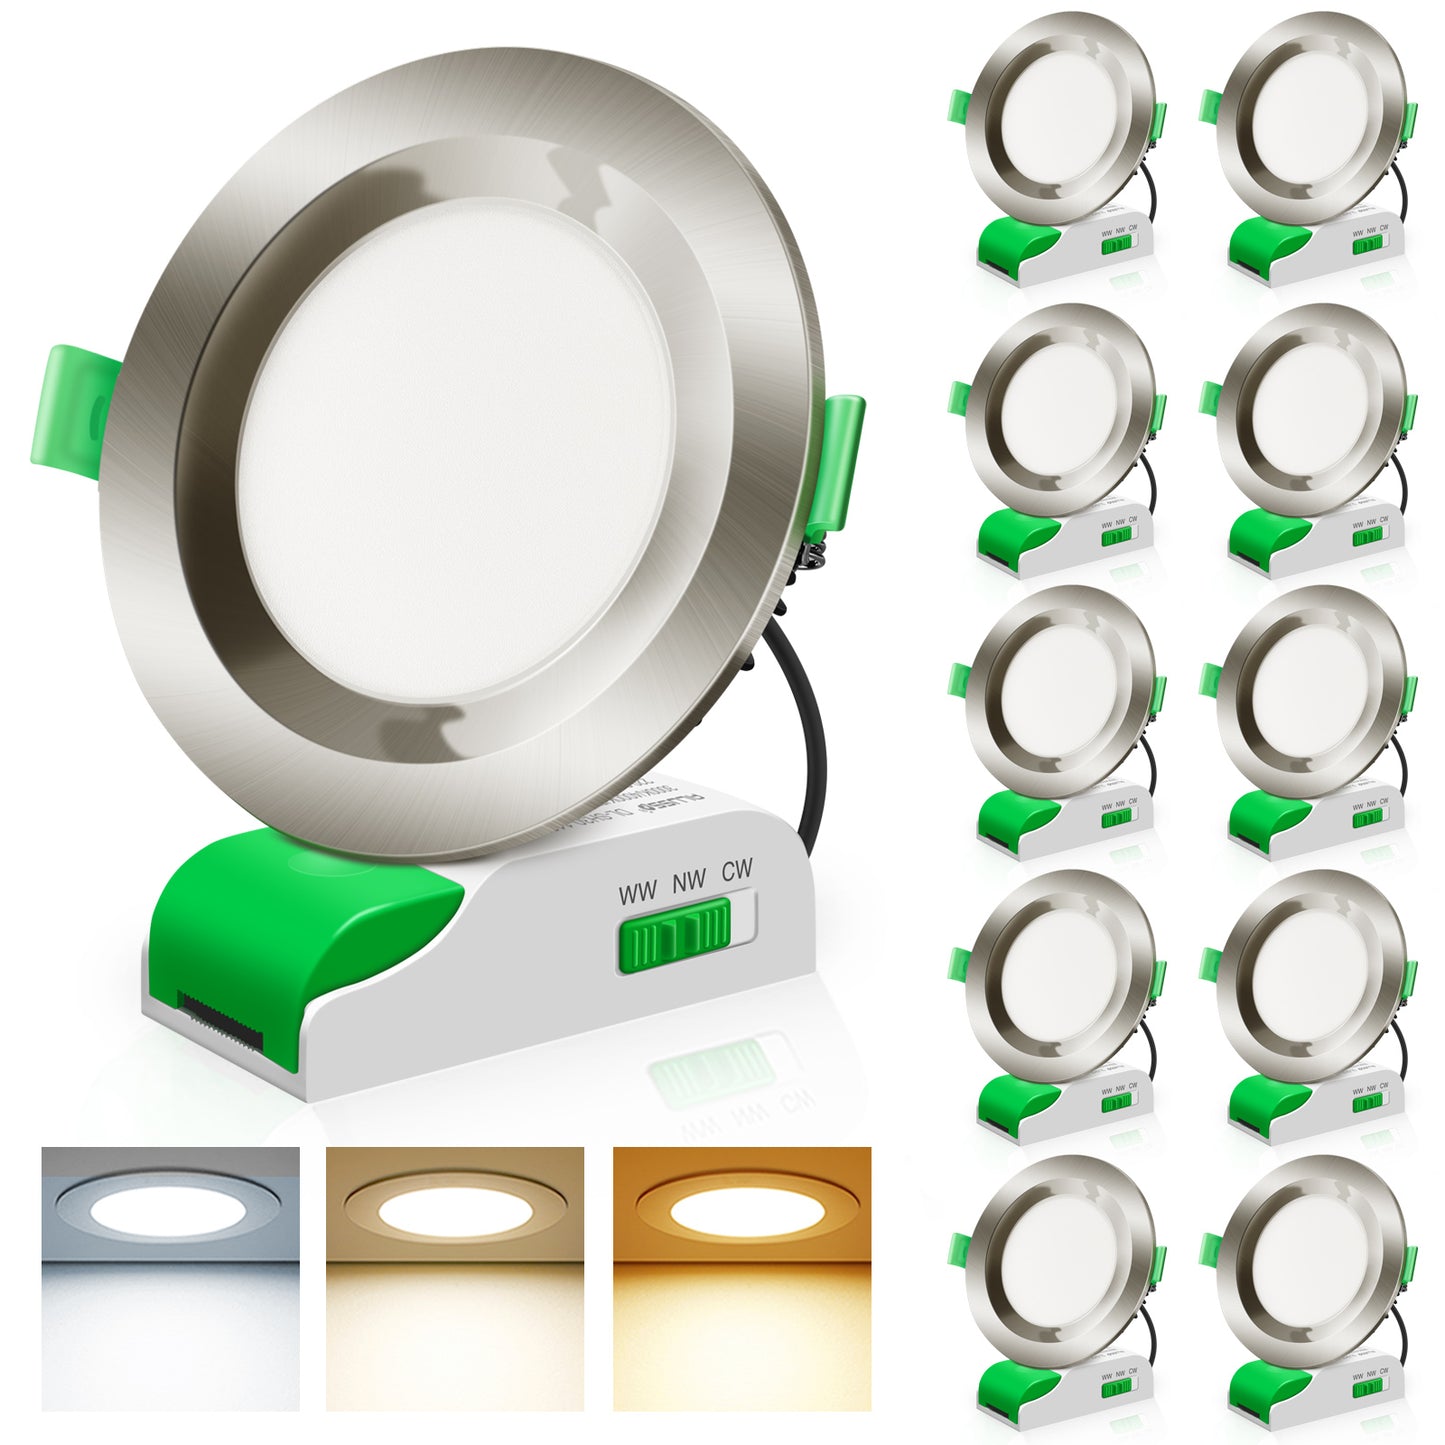 Satin chrome 12W LED Downlight 3CCT Dimmable, Cutout 90-100mm, Recessed Face, 10 Pack